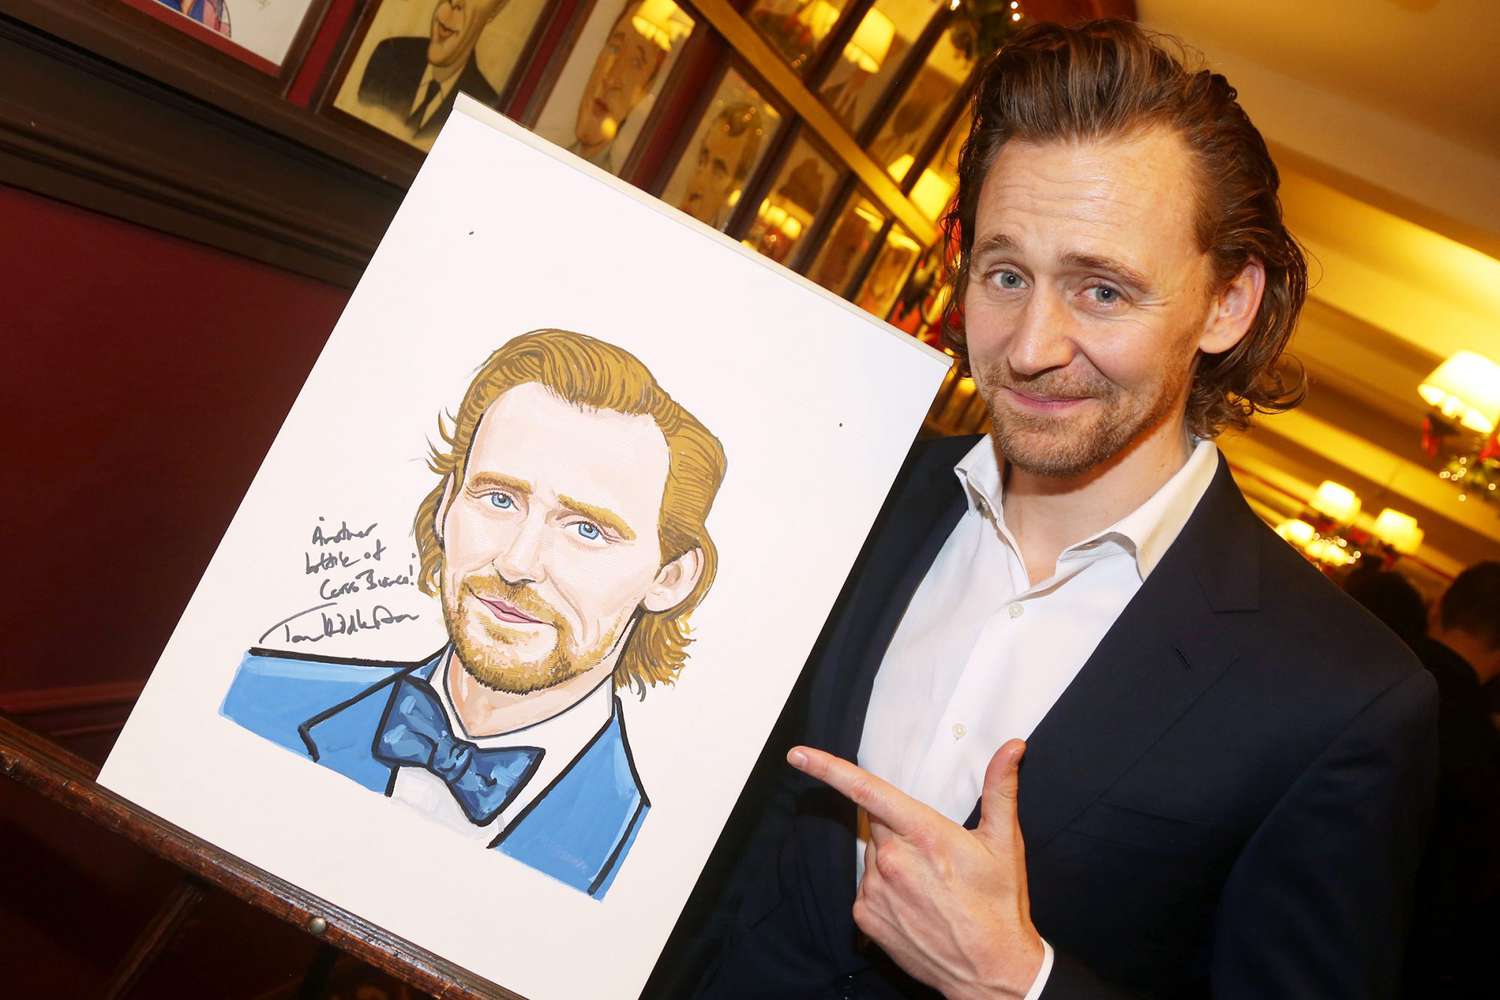 Tom Hiddleston poses as he is honored for his performanve in "Betrayal" on Broadway at Sardi's on December 5, 2019 in New York City